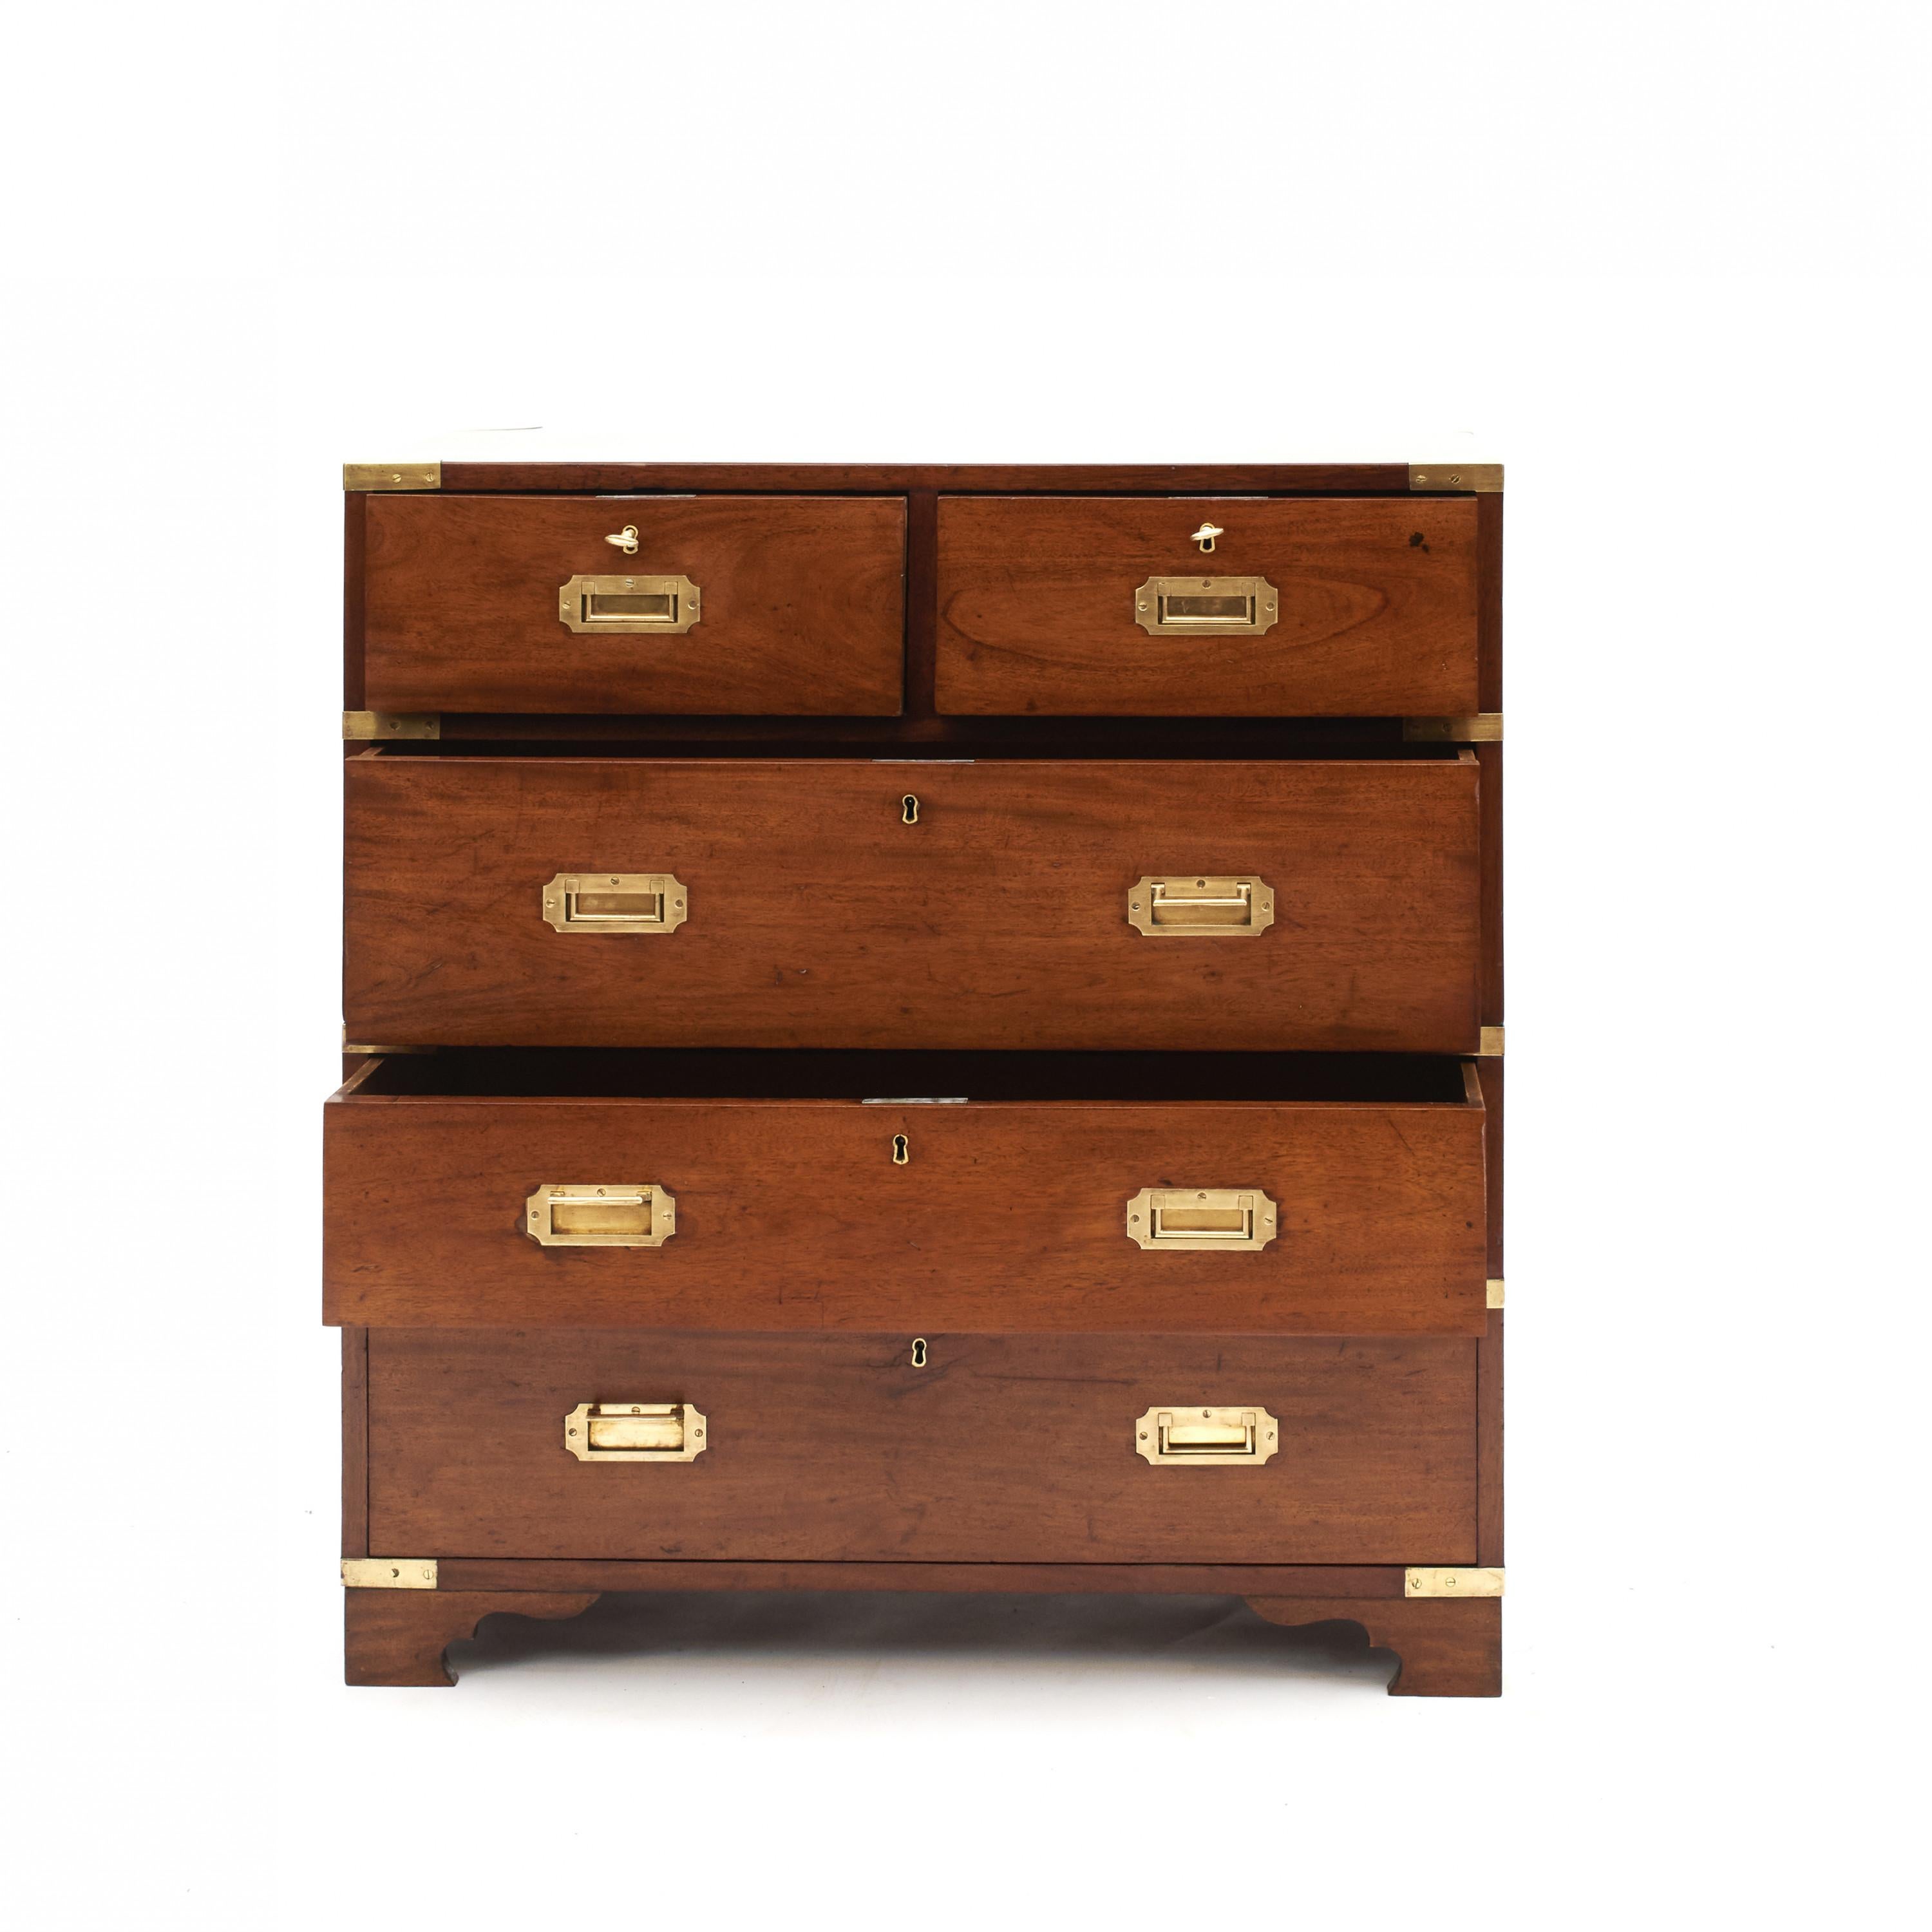 English military officer’s Campaign chest.
Made solid teak accented with brass fittings.
wo short drawers over three long drawers sitting on bracket feet,
England, circa 1880.

Campaign -era chests were the travel items of British military